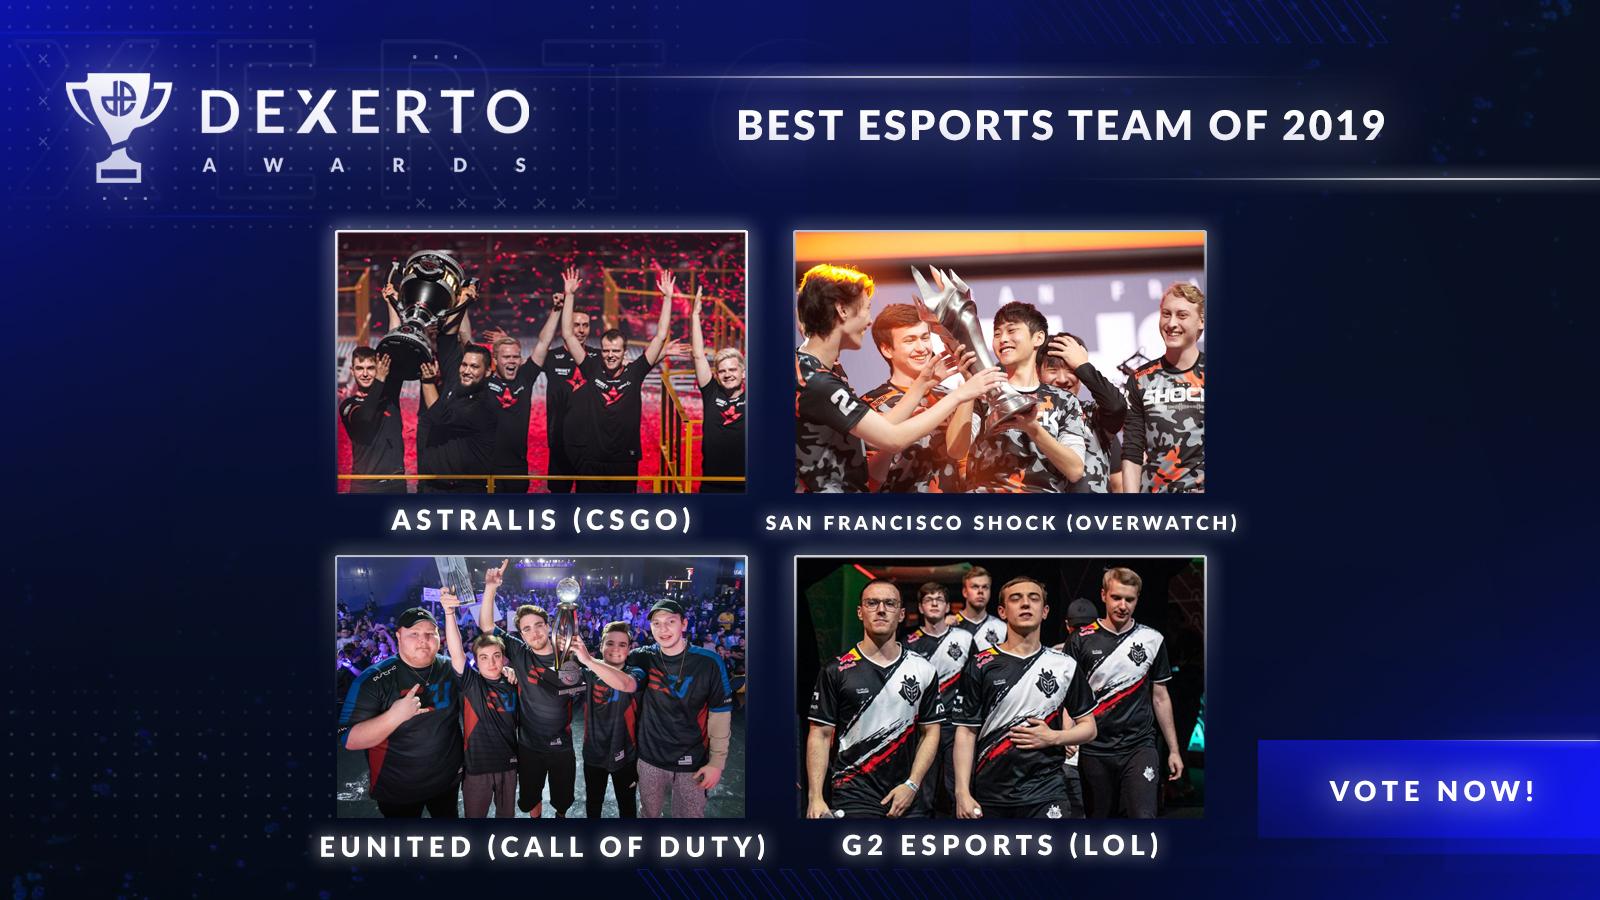 The best esports teams of 2019